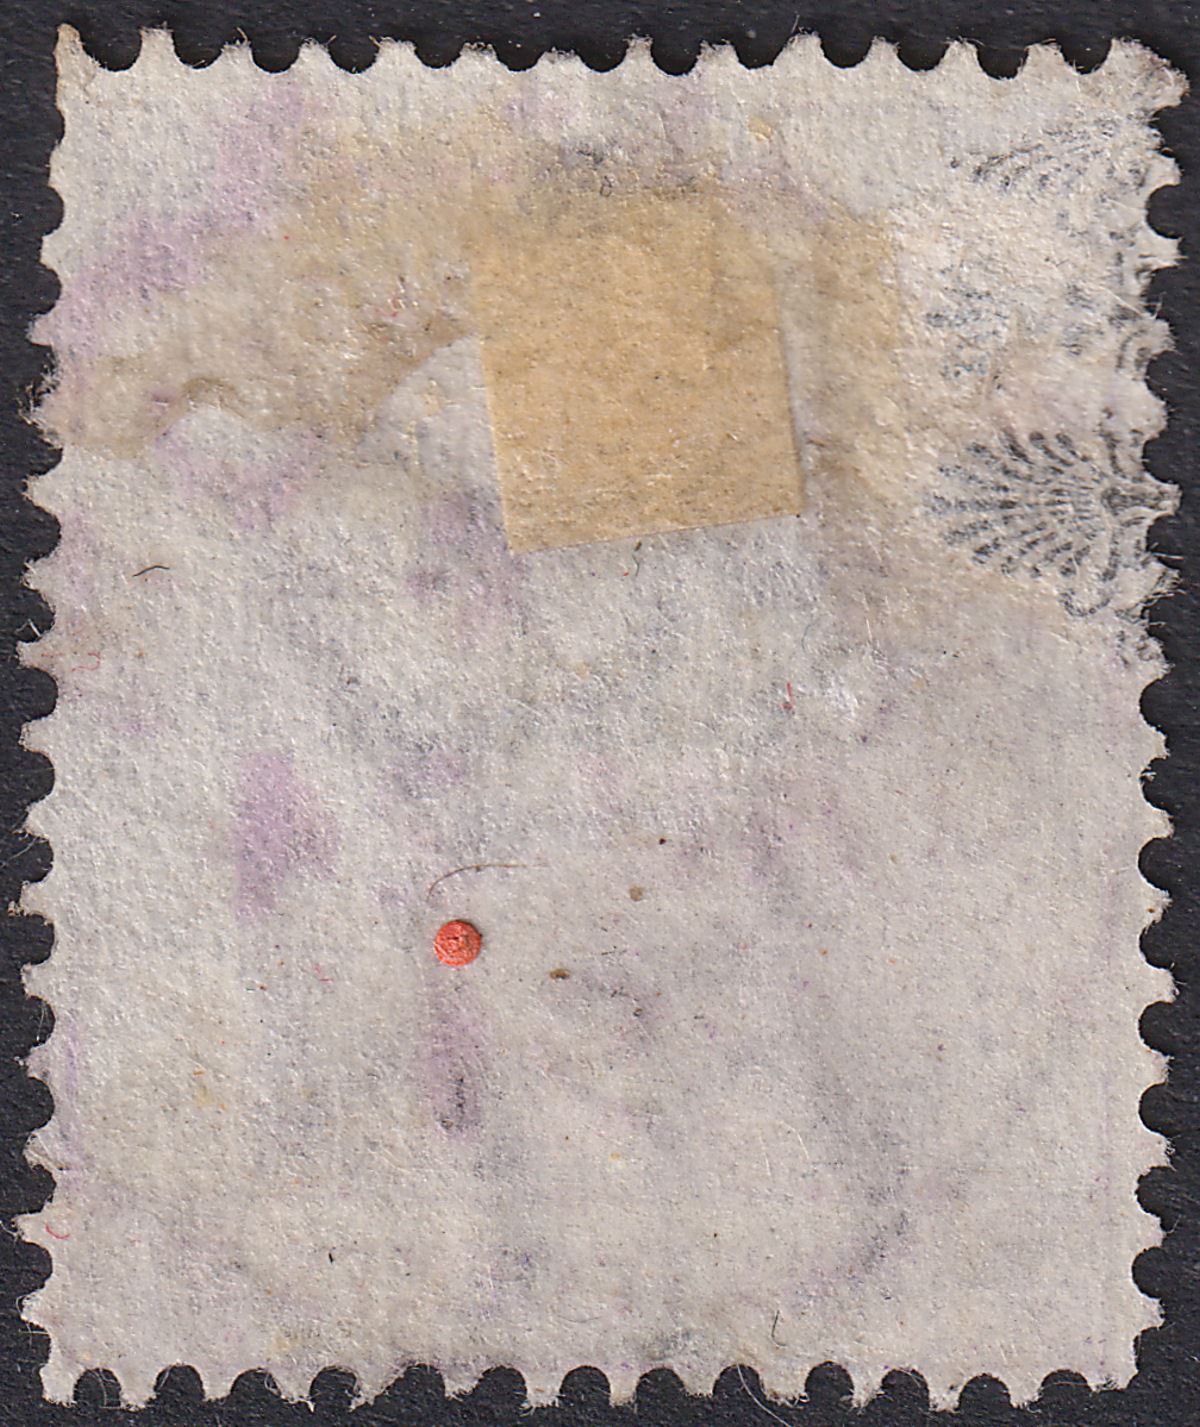 Hong Kong 1891 QV 28c Surch 30c Used with CANTON * Postmark SG Z149 cat £140